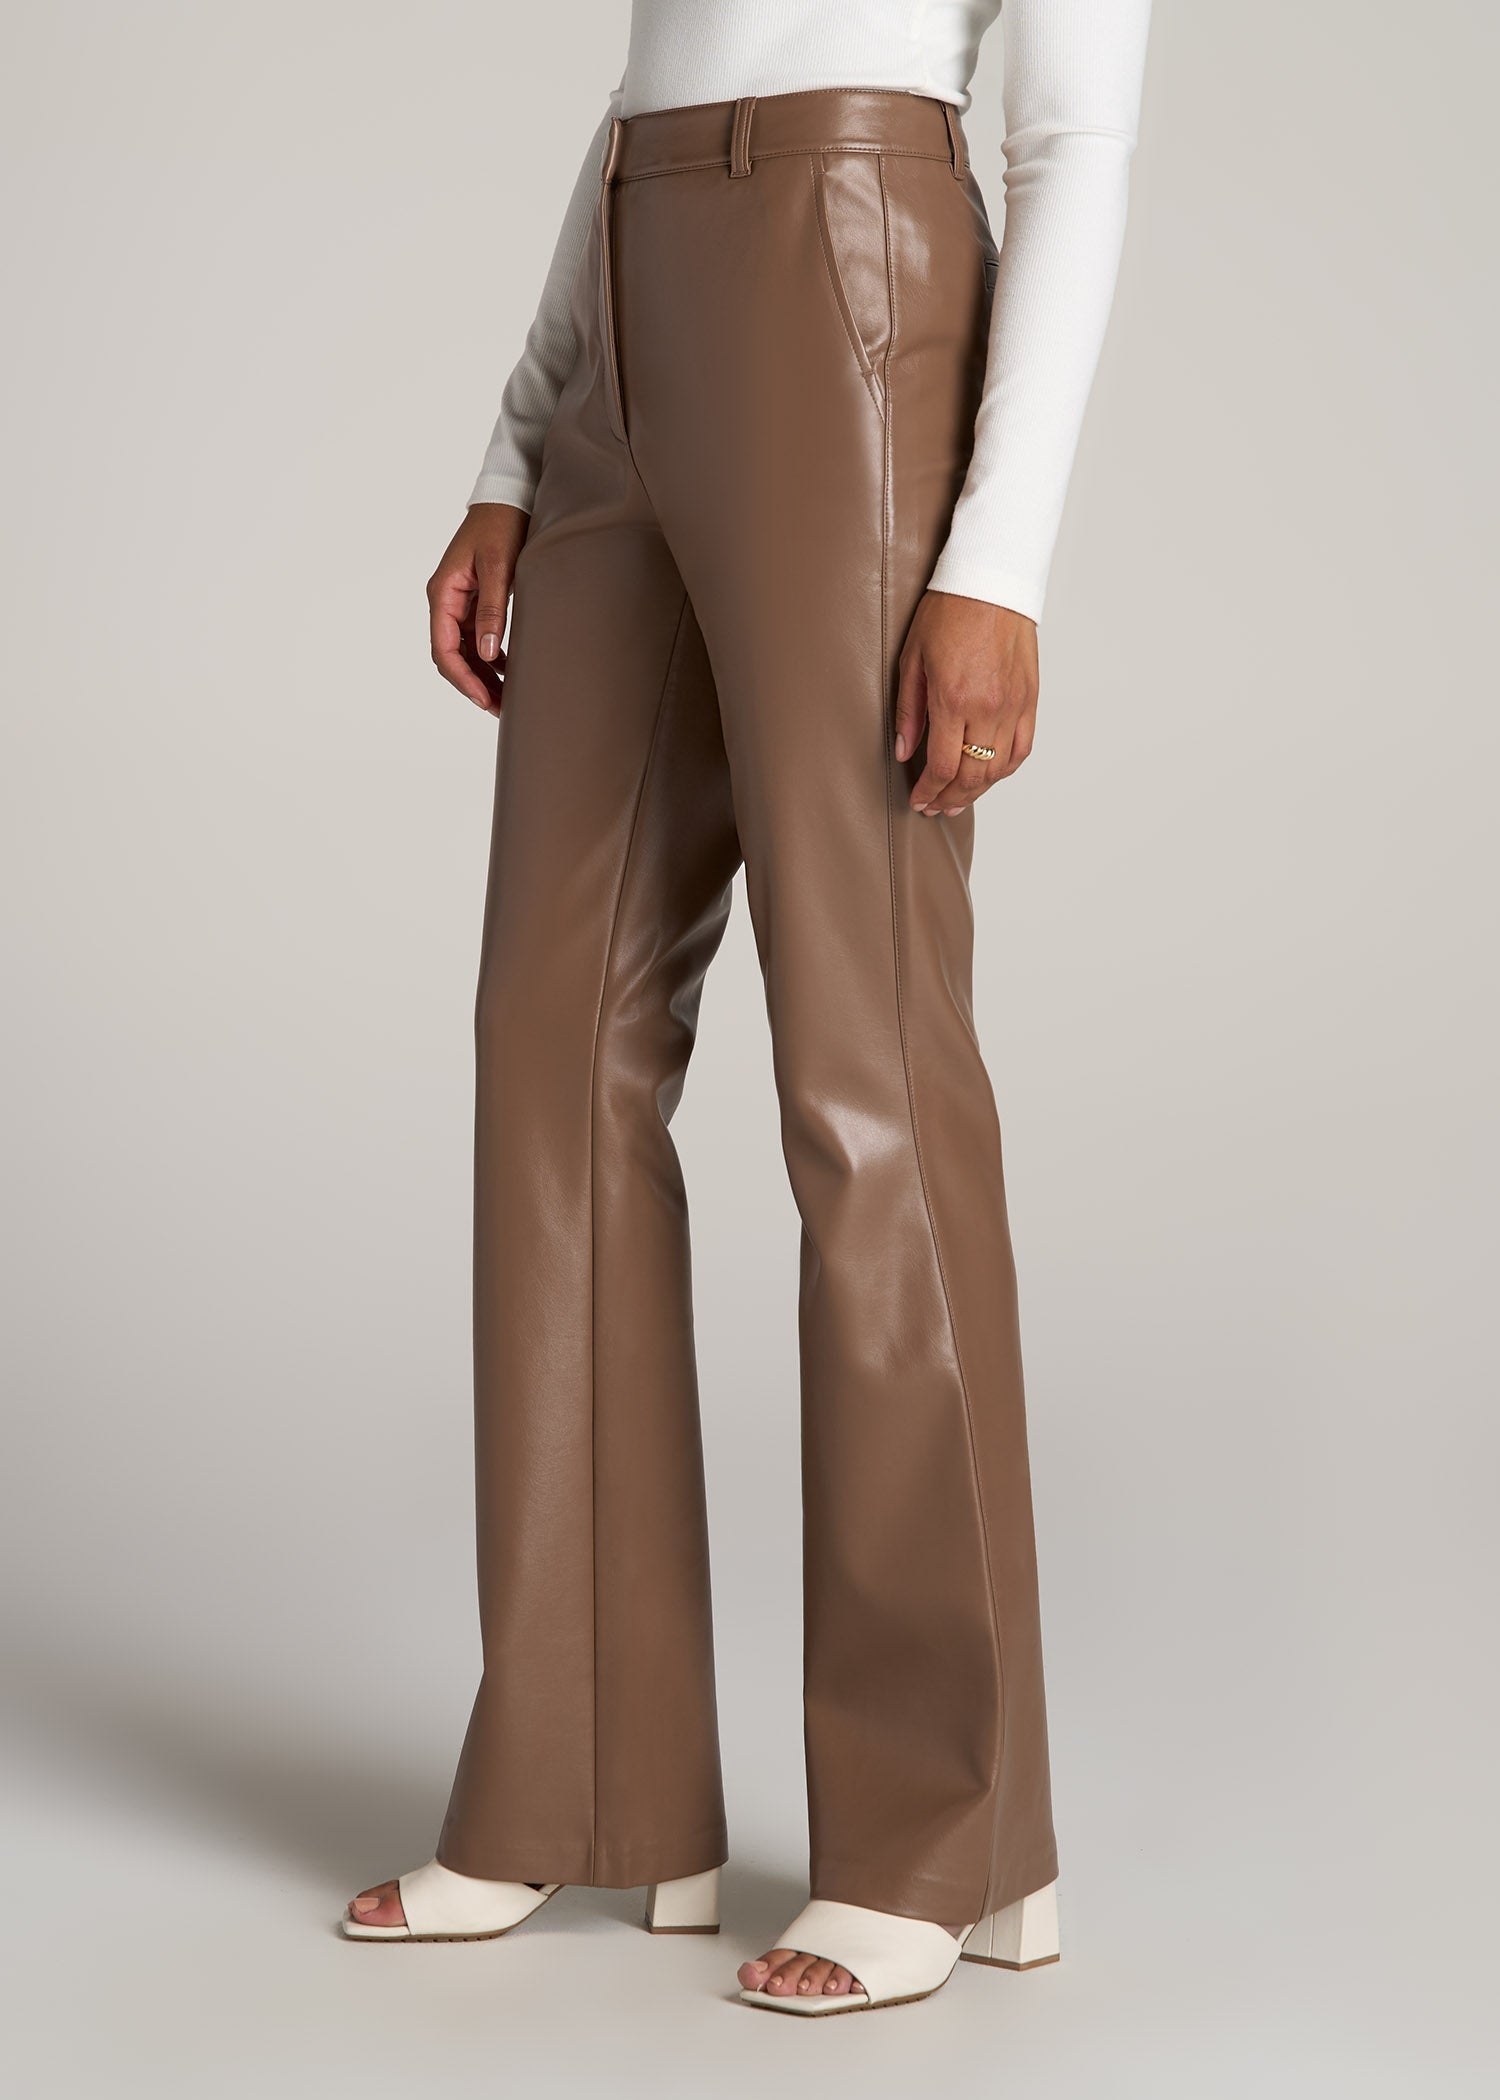 American-Tall-Women-High-Rise-Flare-Faux-Leather-Pant-Aztec-Brown-side